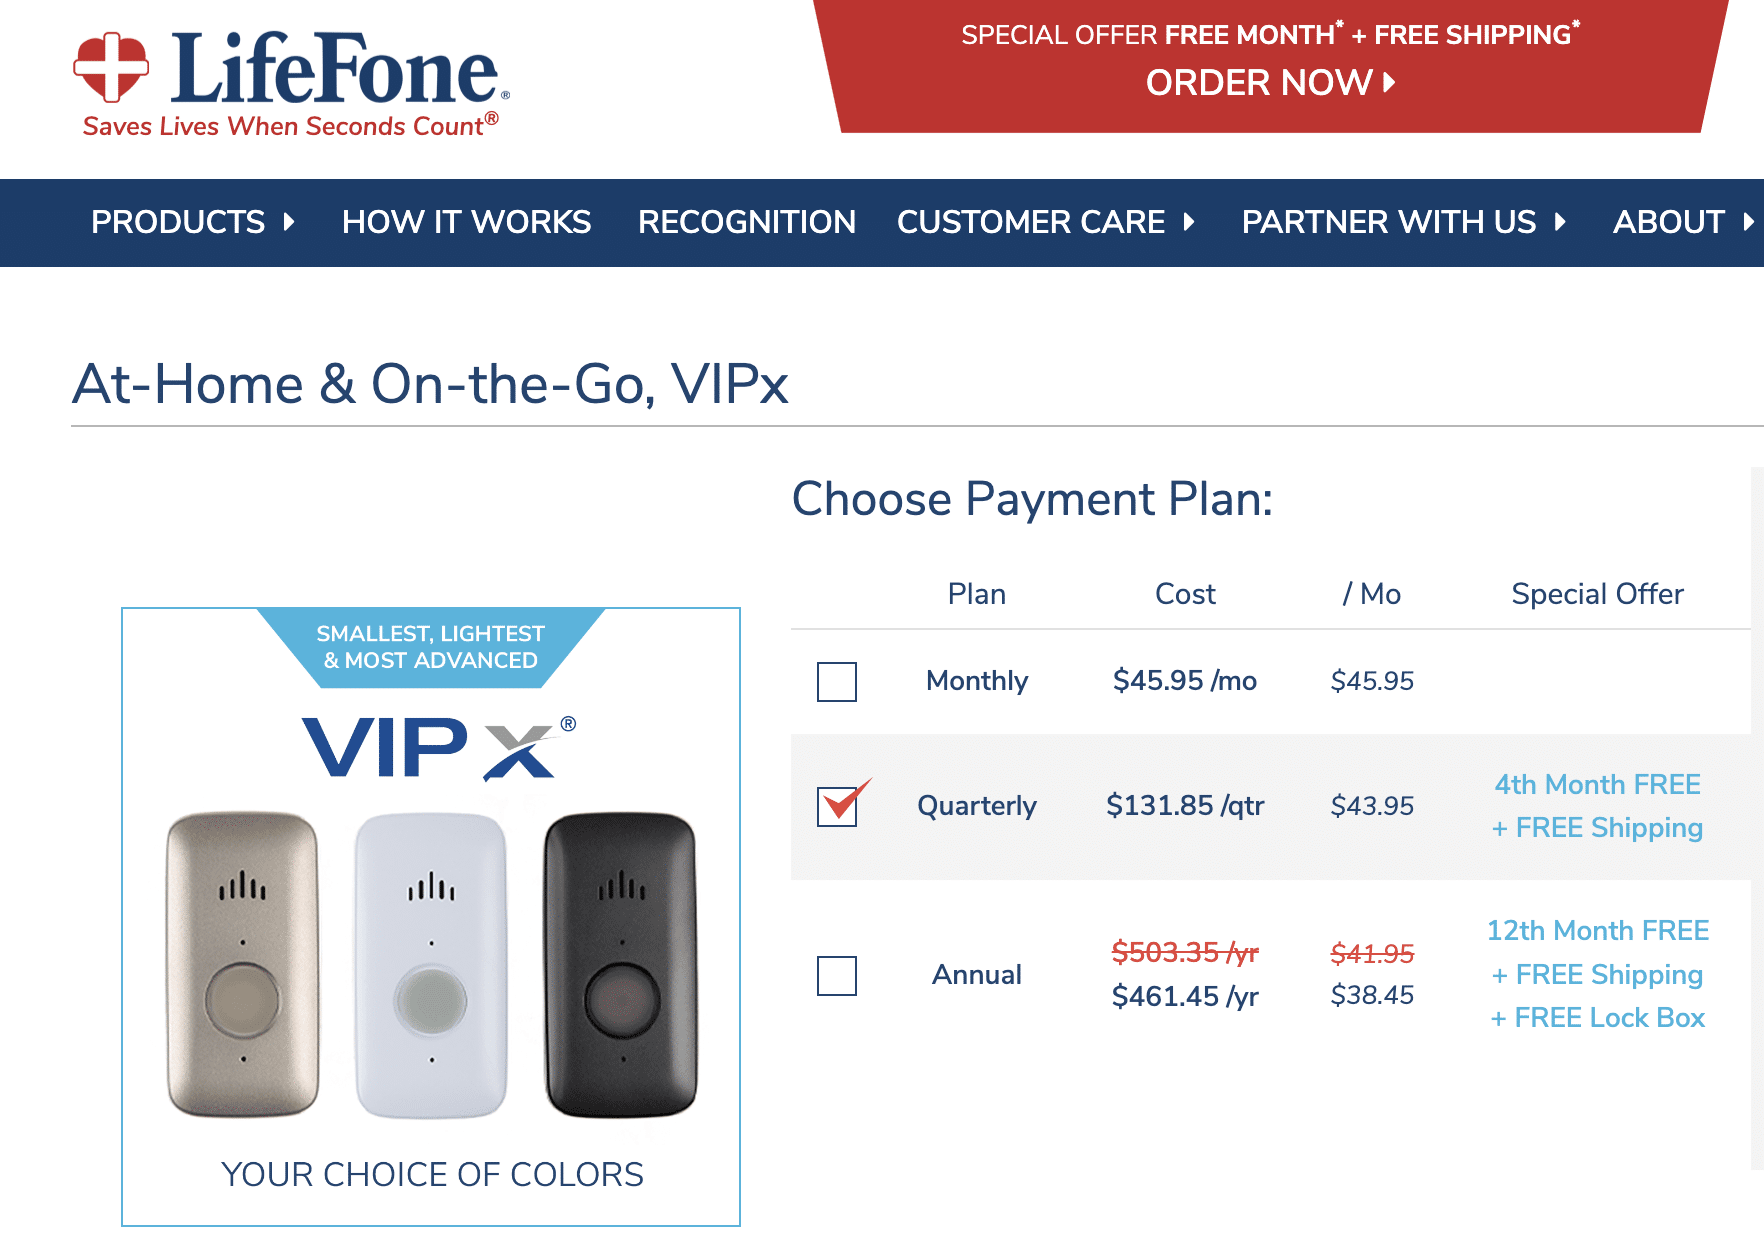 LifeFone VIPx checkout page with monthly, quarterly, and annual payment plans